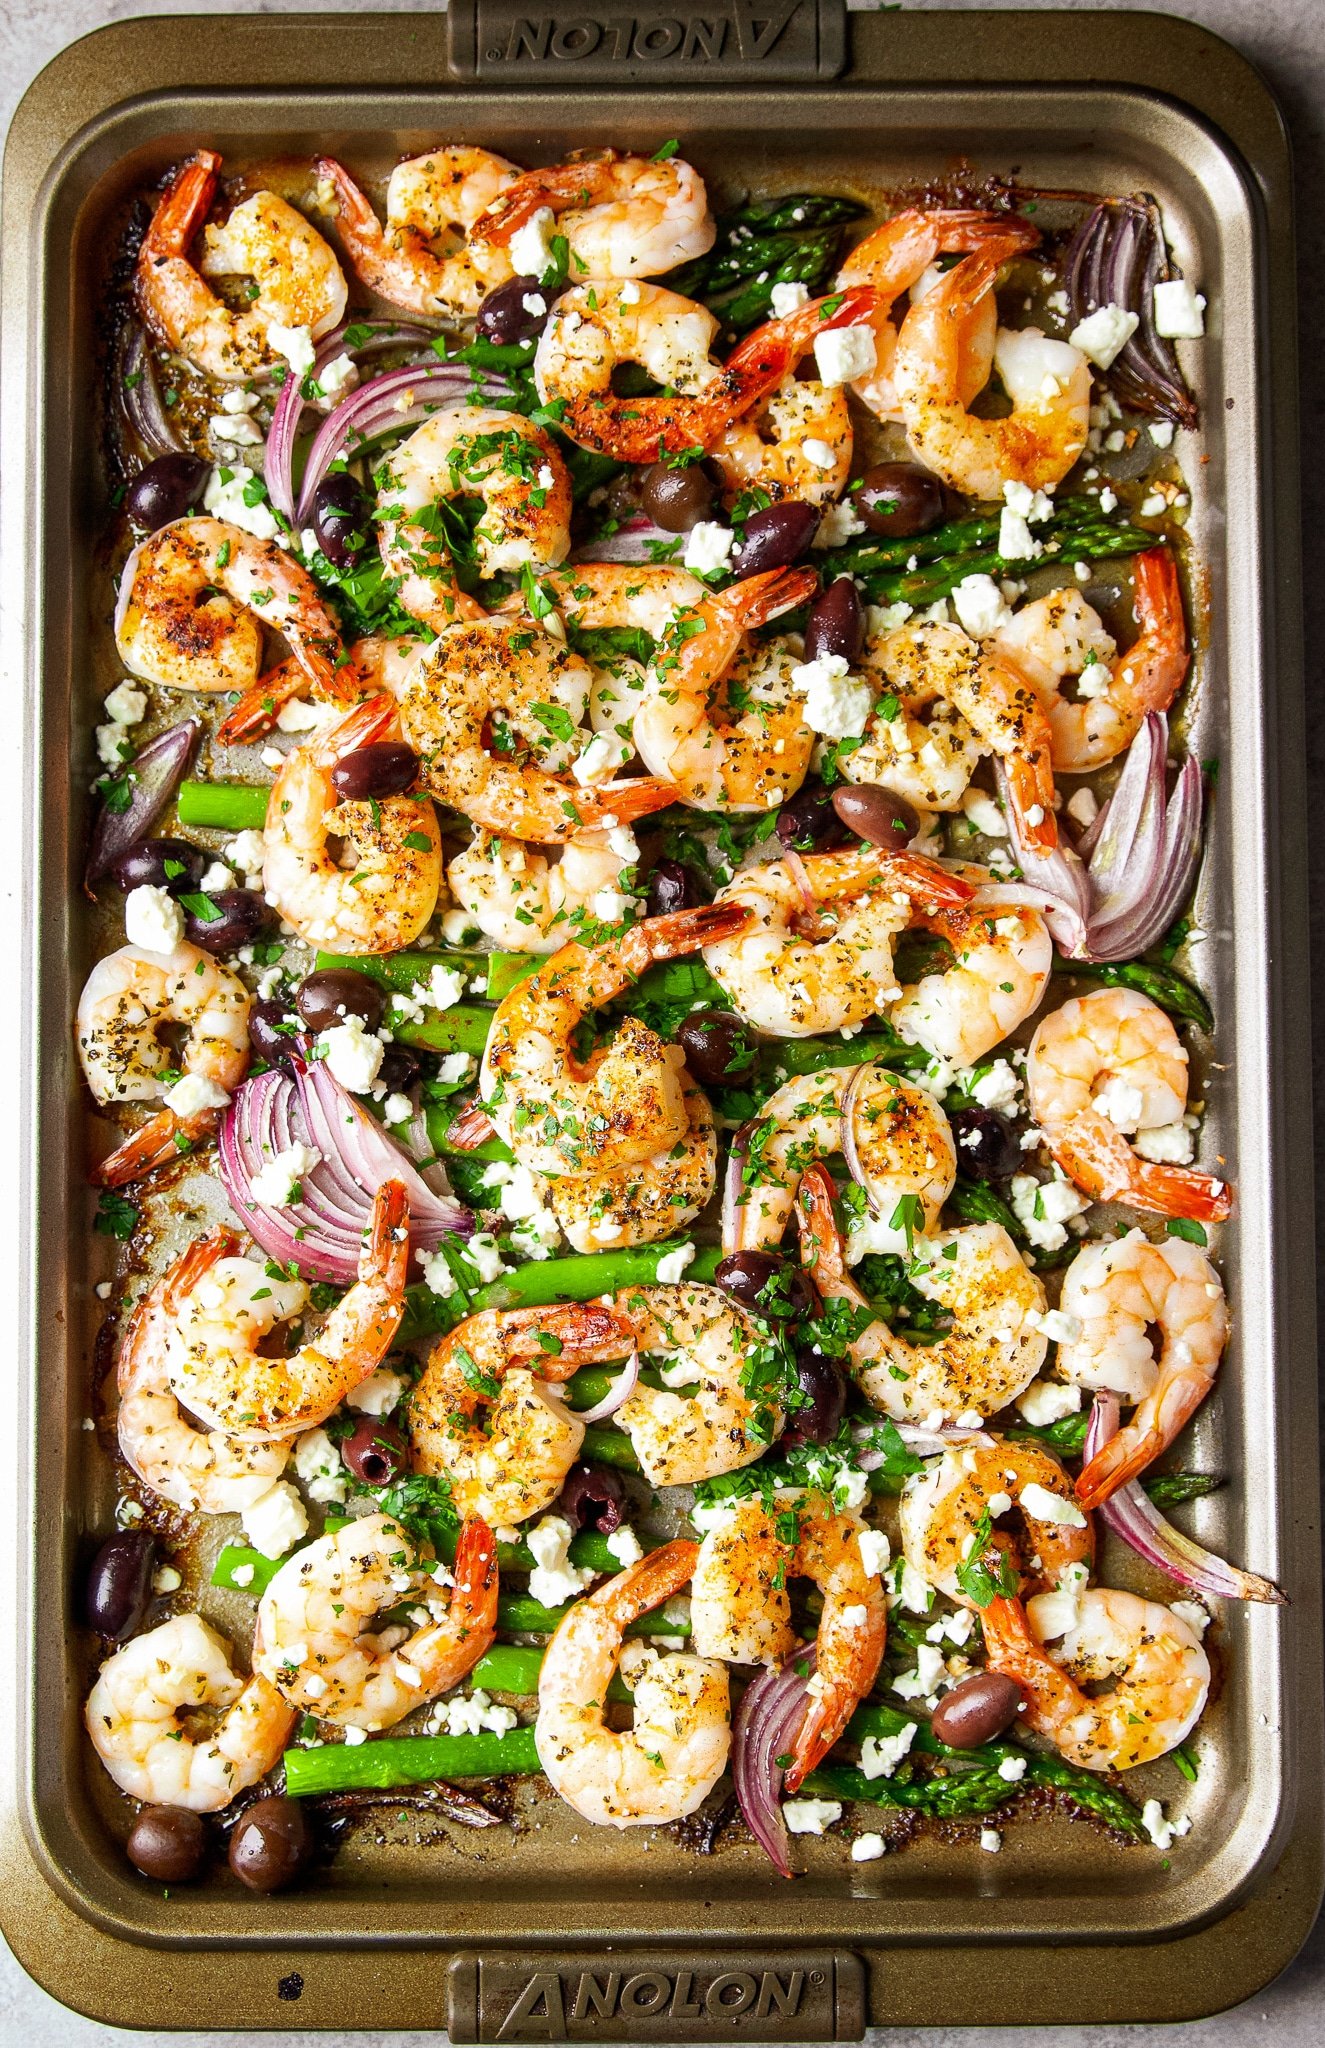 Cooked shrimp, onions, and asparagus mixed with seasonings and feta cheese on a sheet pan